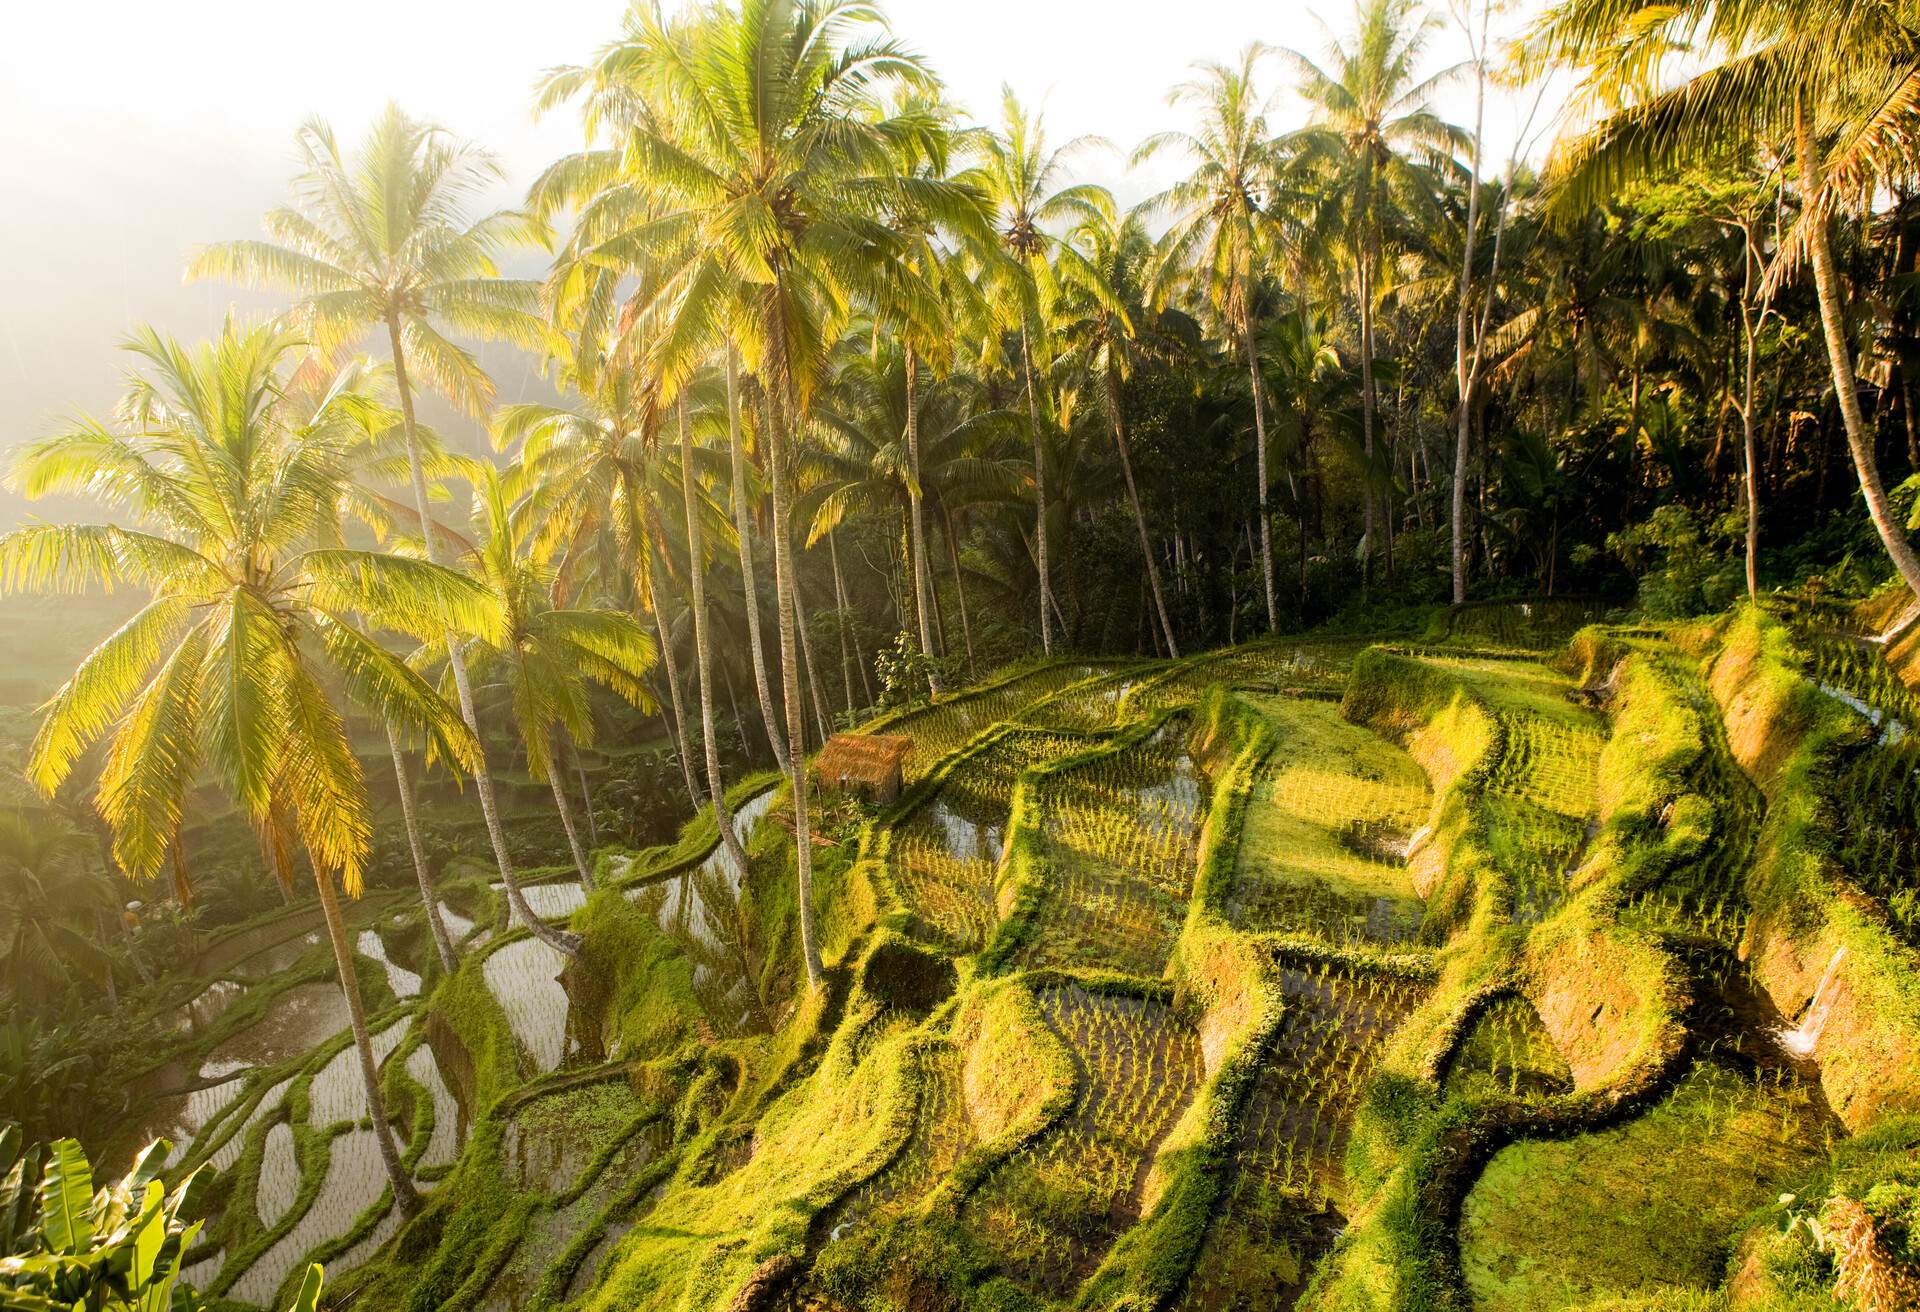 DEST_INDONESIA_BALI_UBUD_RICE-PADDY_GettyImages-175542163